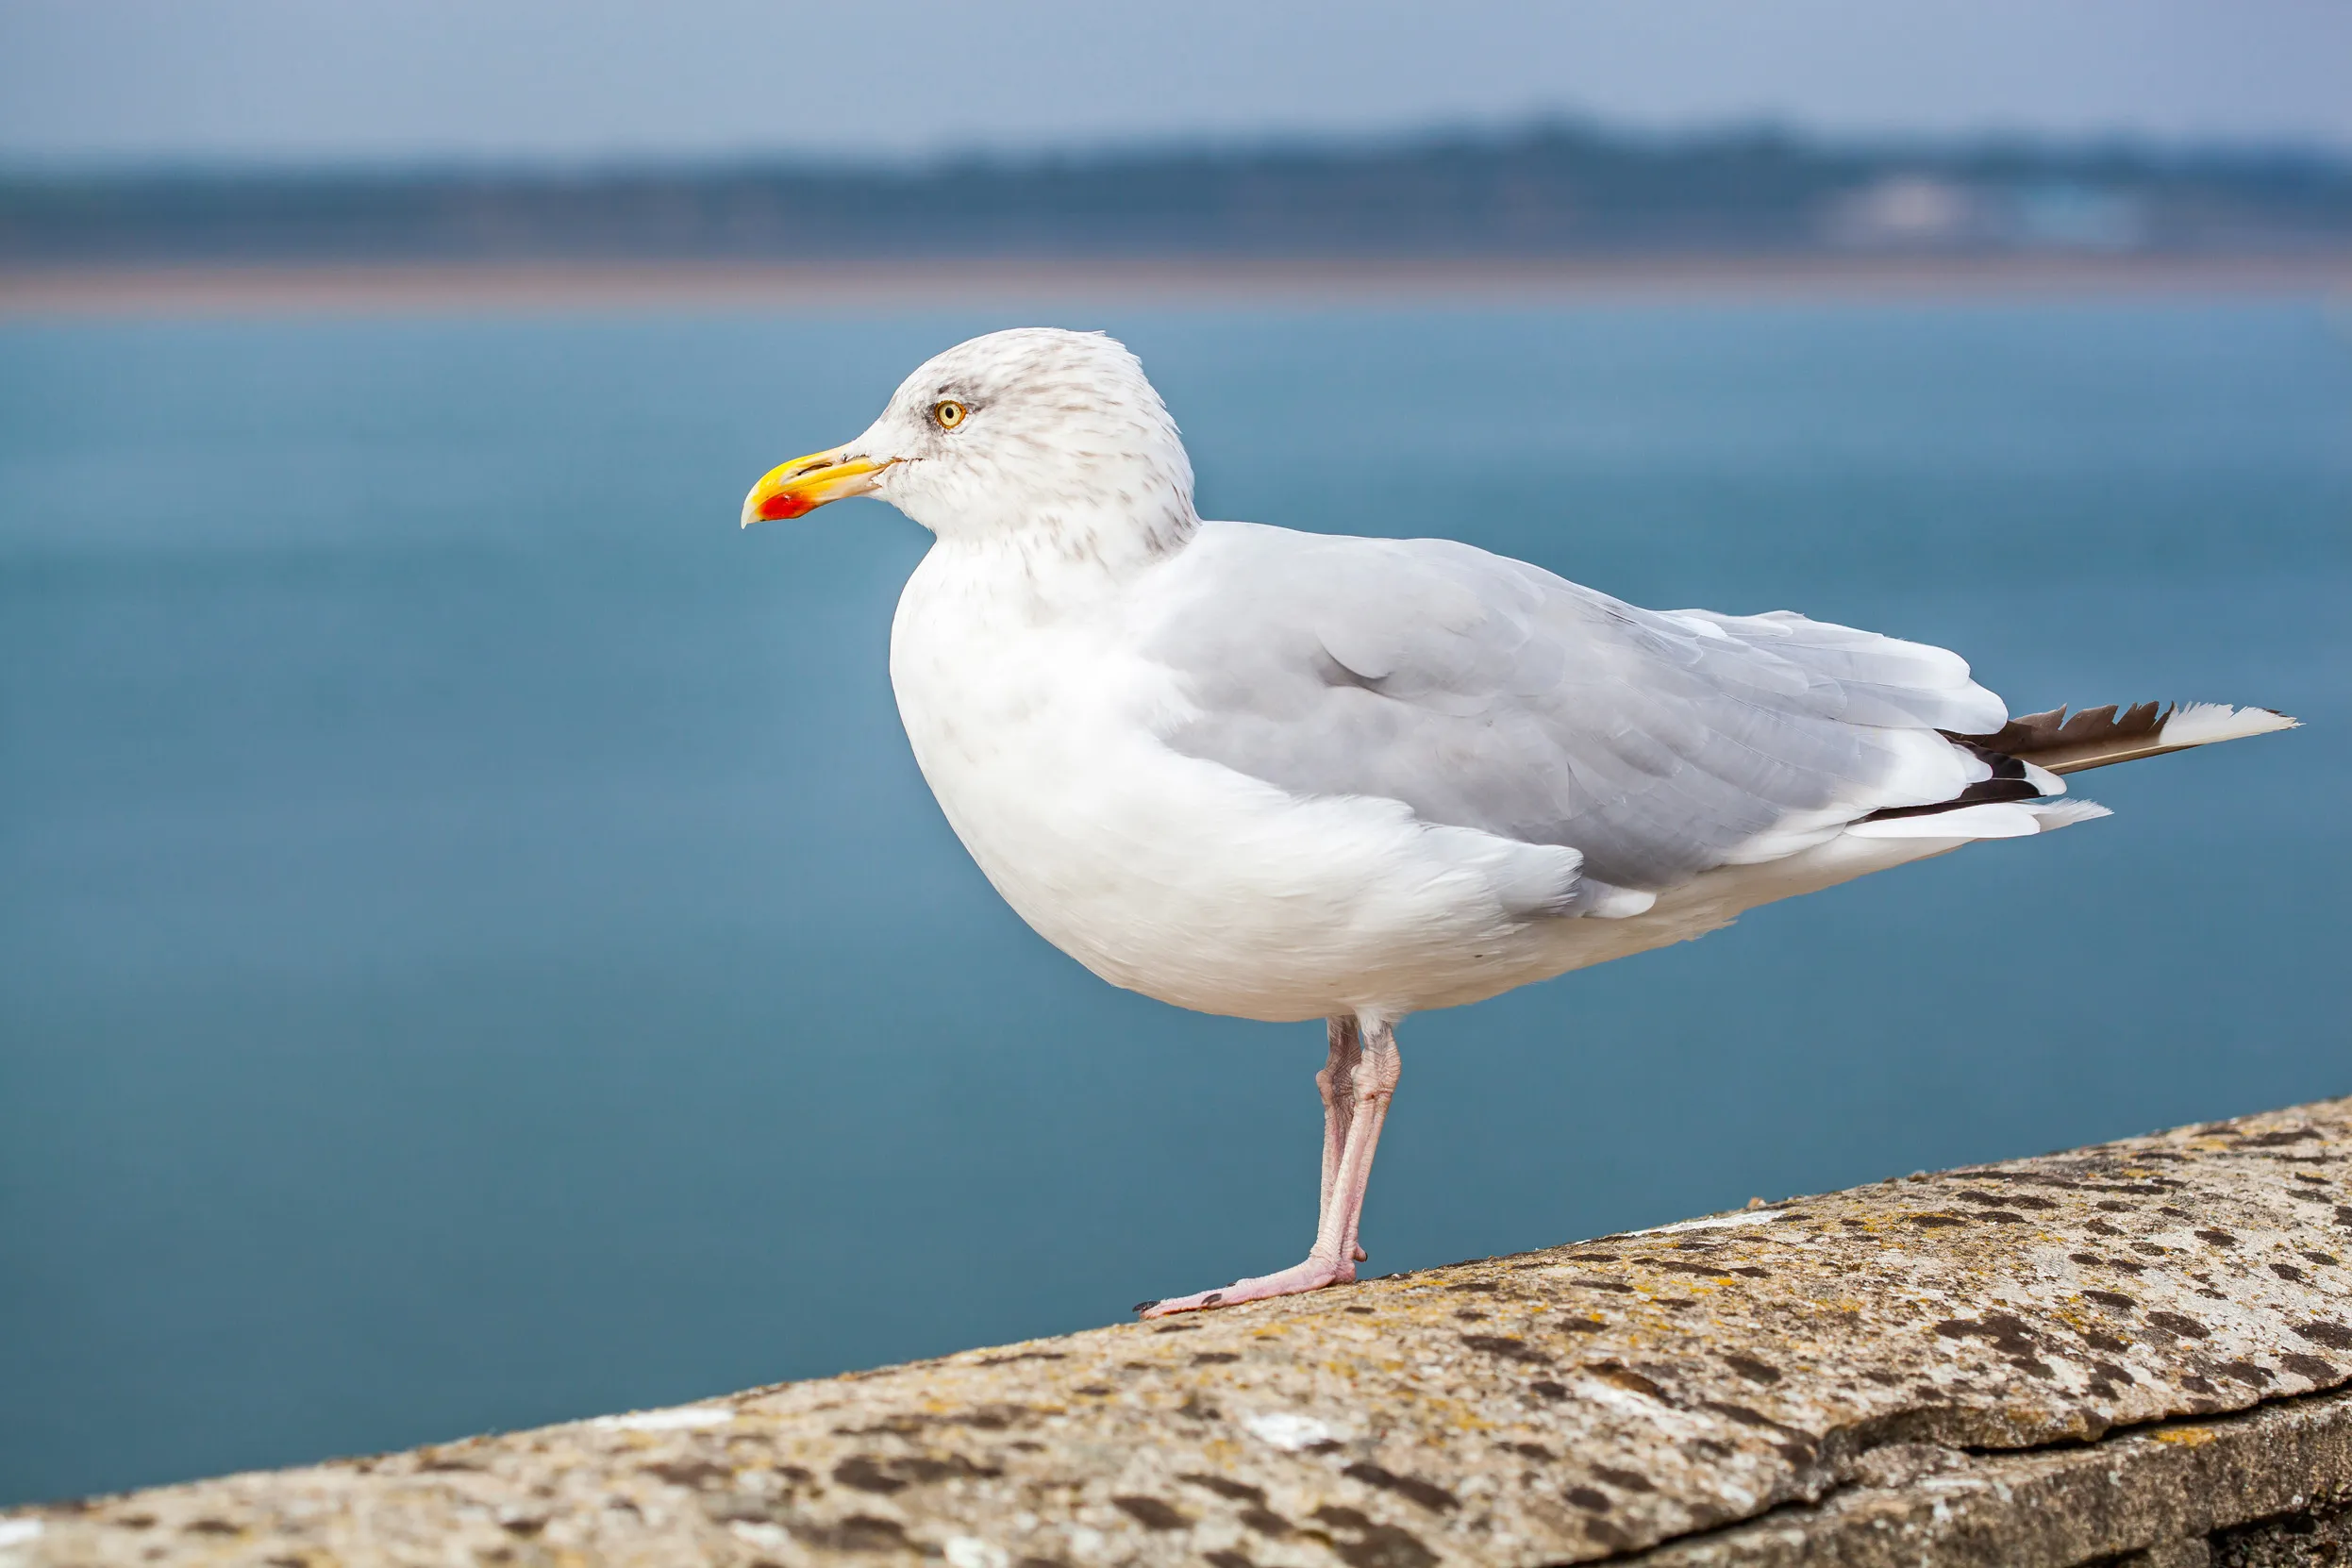 A lone Herring Gull stood on a stone wall overlooking the sea.